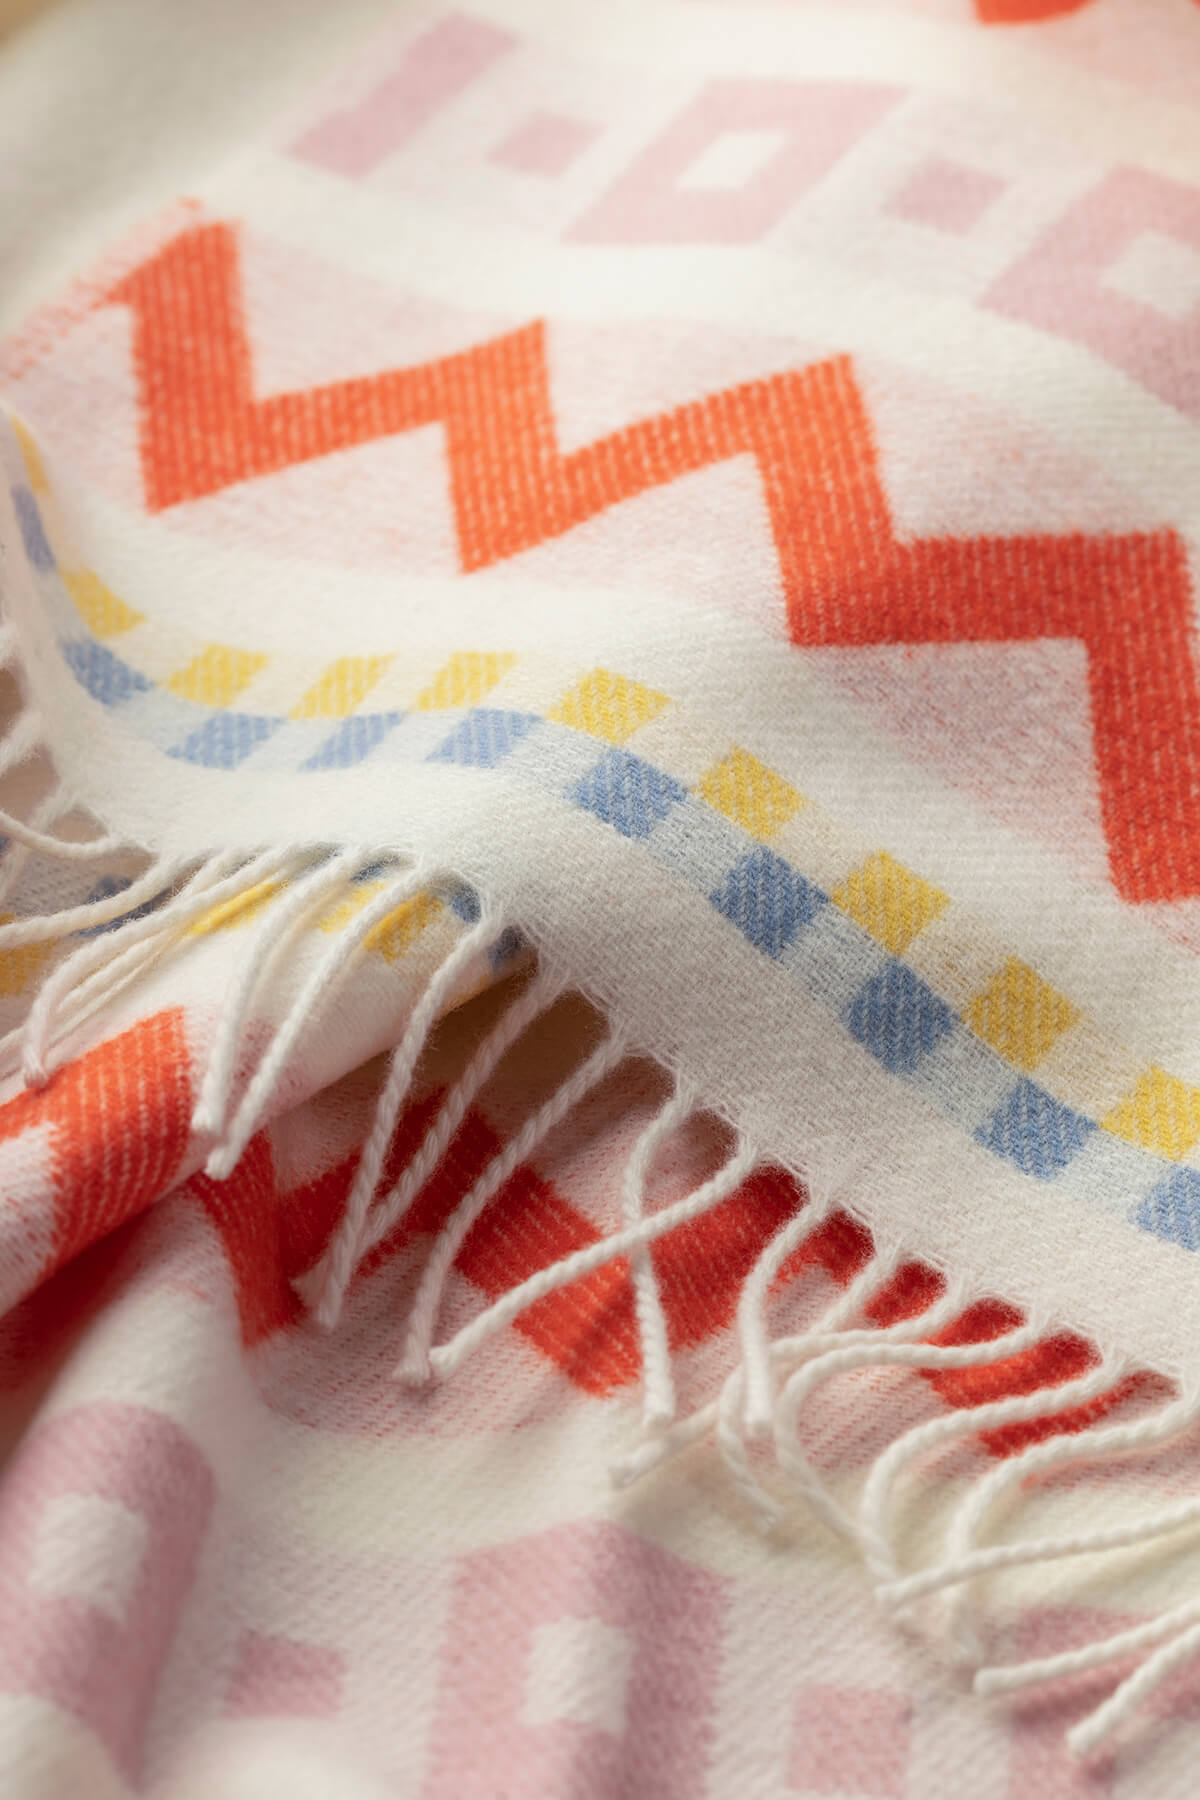 Detail image of Johnstons of Elgin Children's Zig Zag Blanket in shades of pink, orange, and cream WB002334RU7277ONE